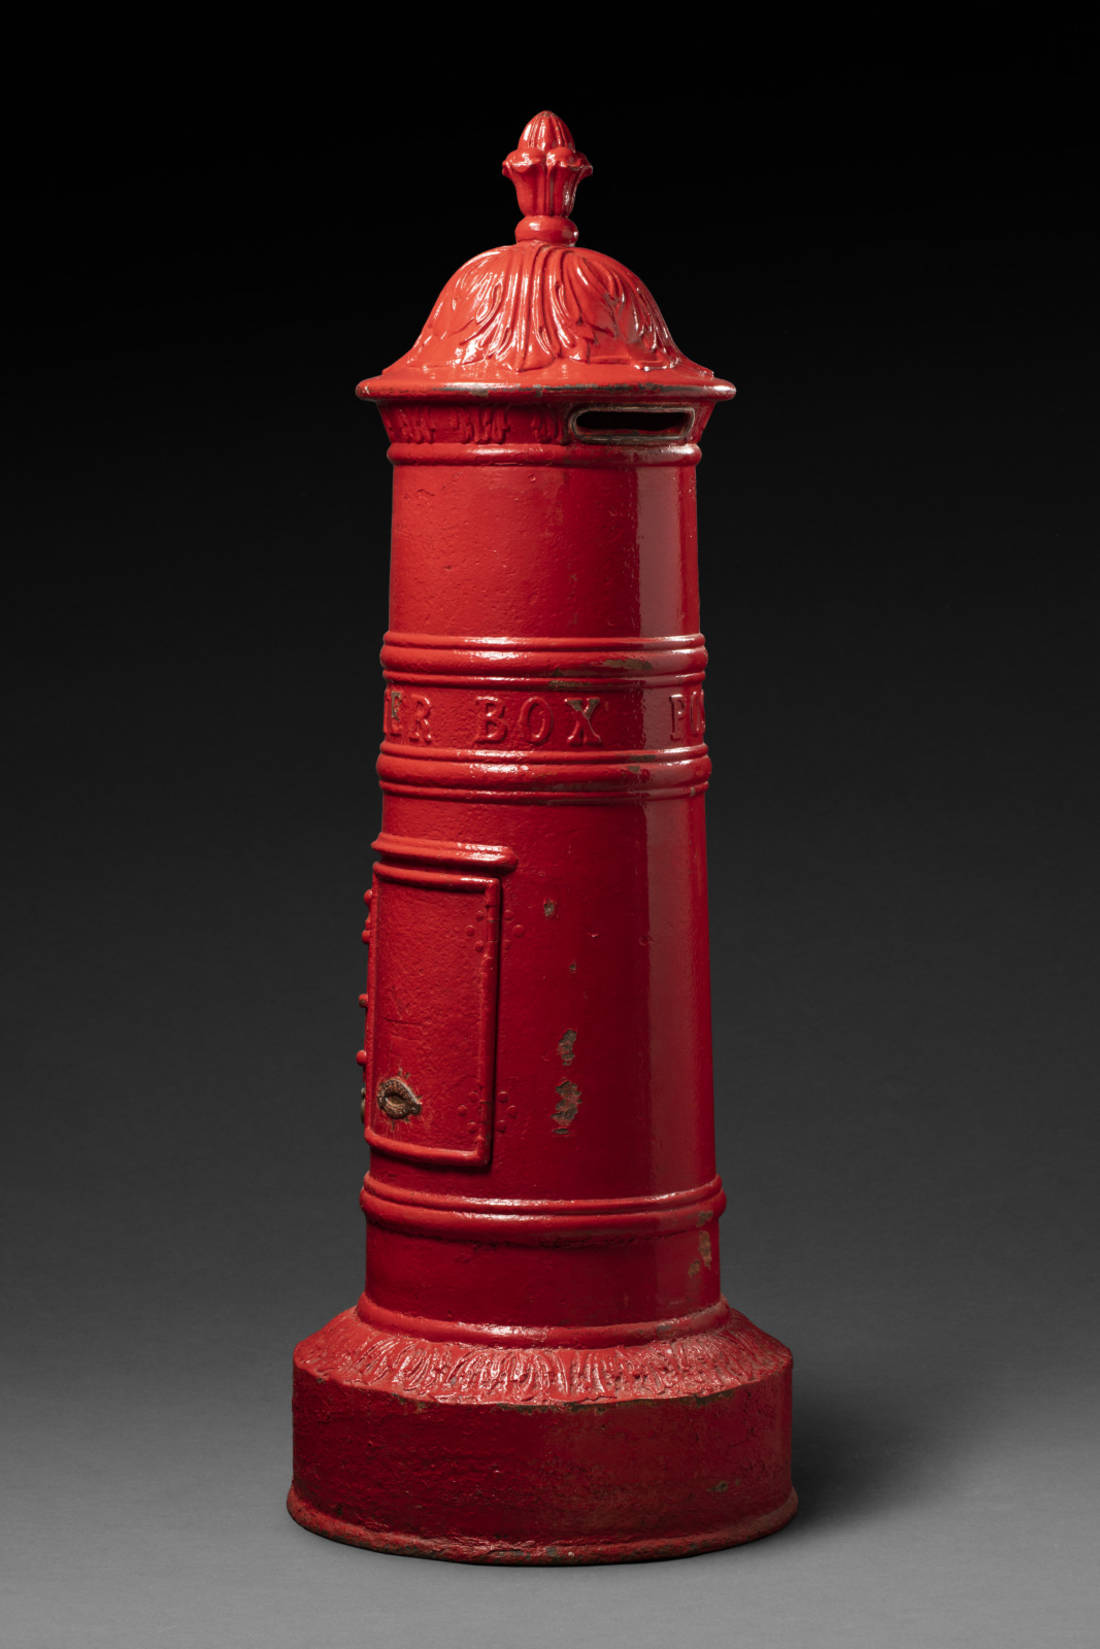 New South Wales Postal Service cylindrical red cast iron post box